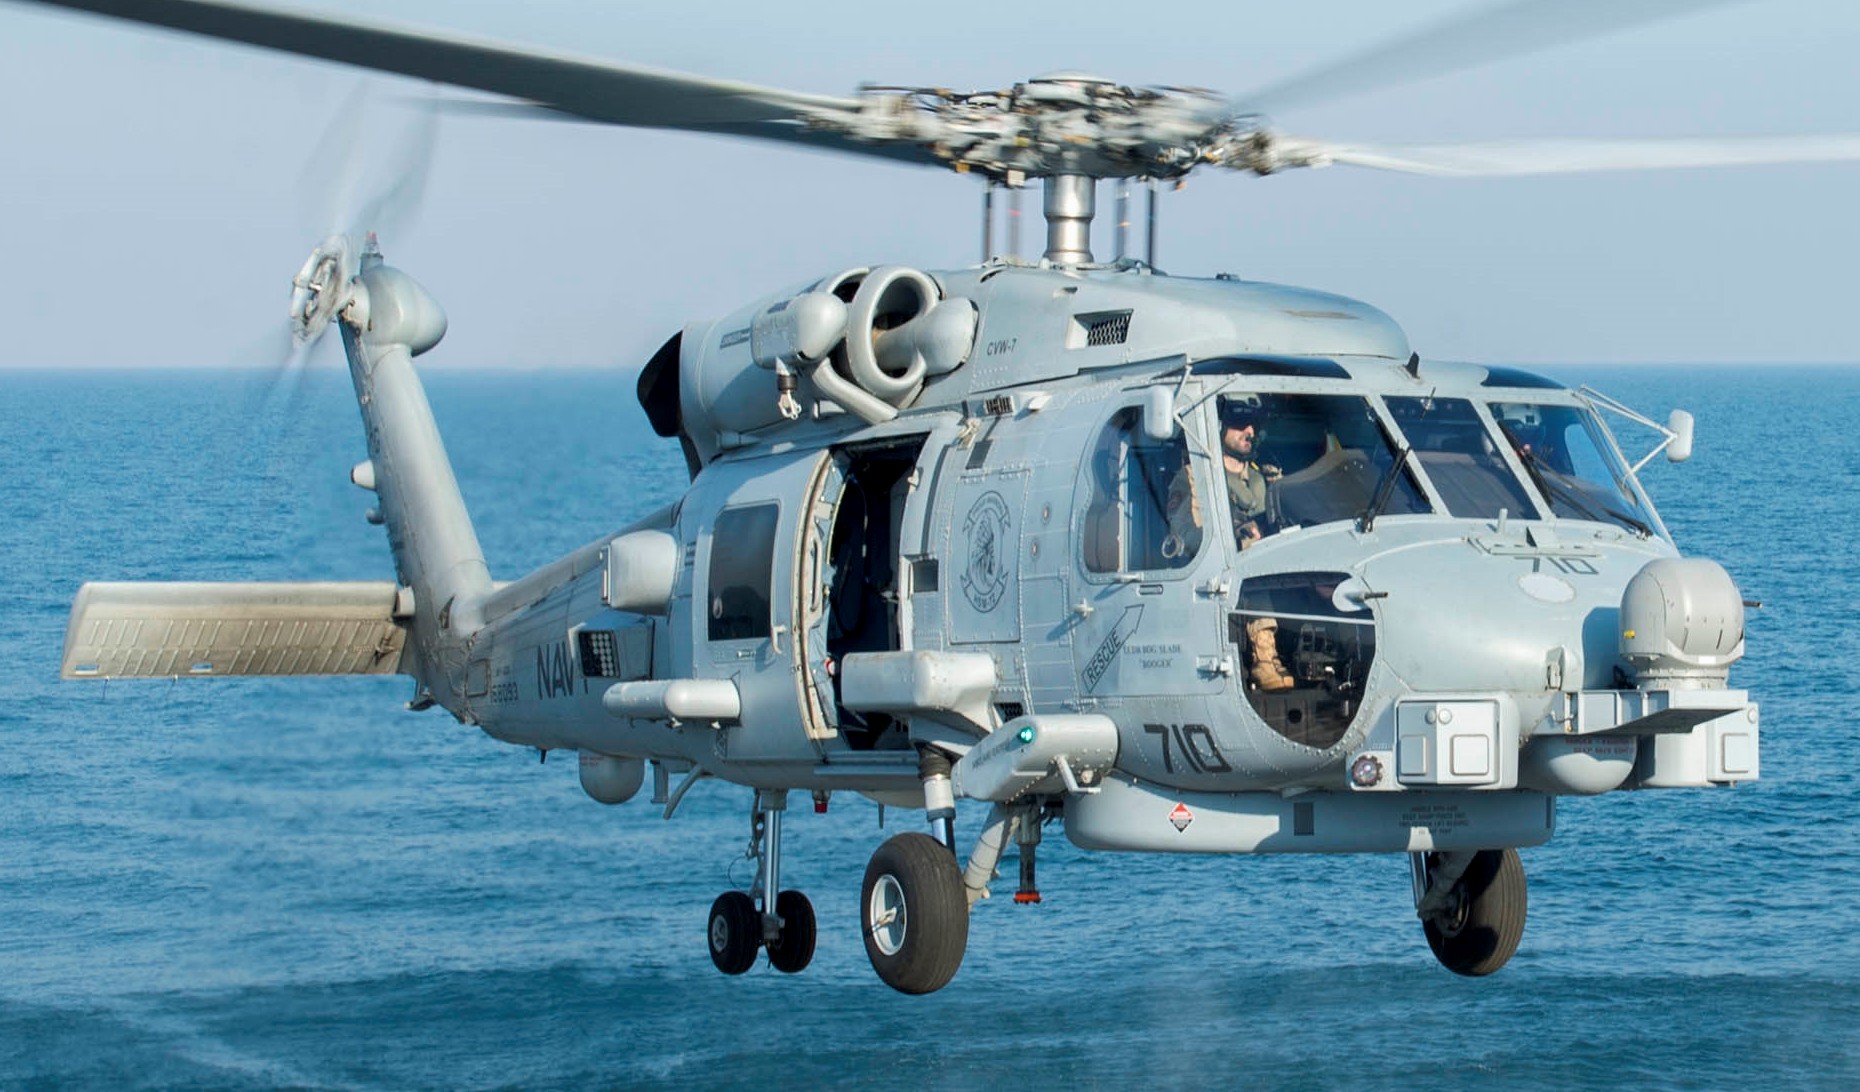 hsm-72 proud warriors helicopter maritime strike squadron us navy mh-60r seahawk 2016 11